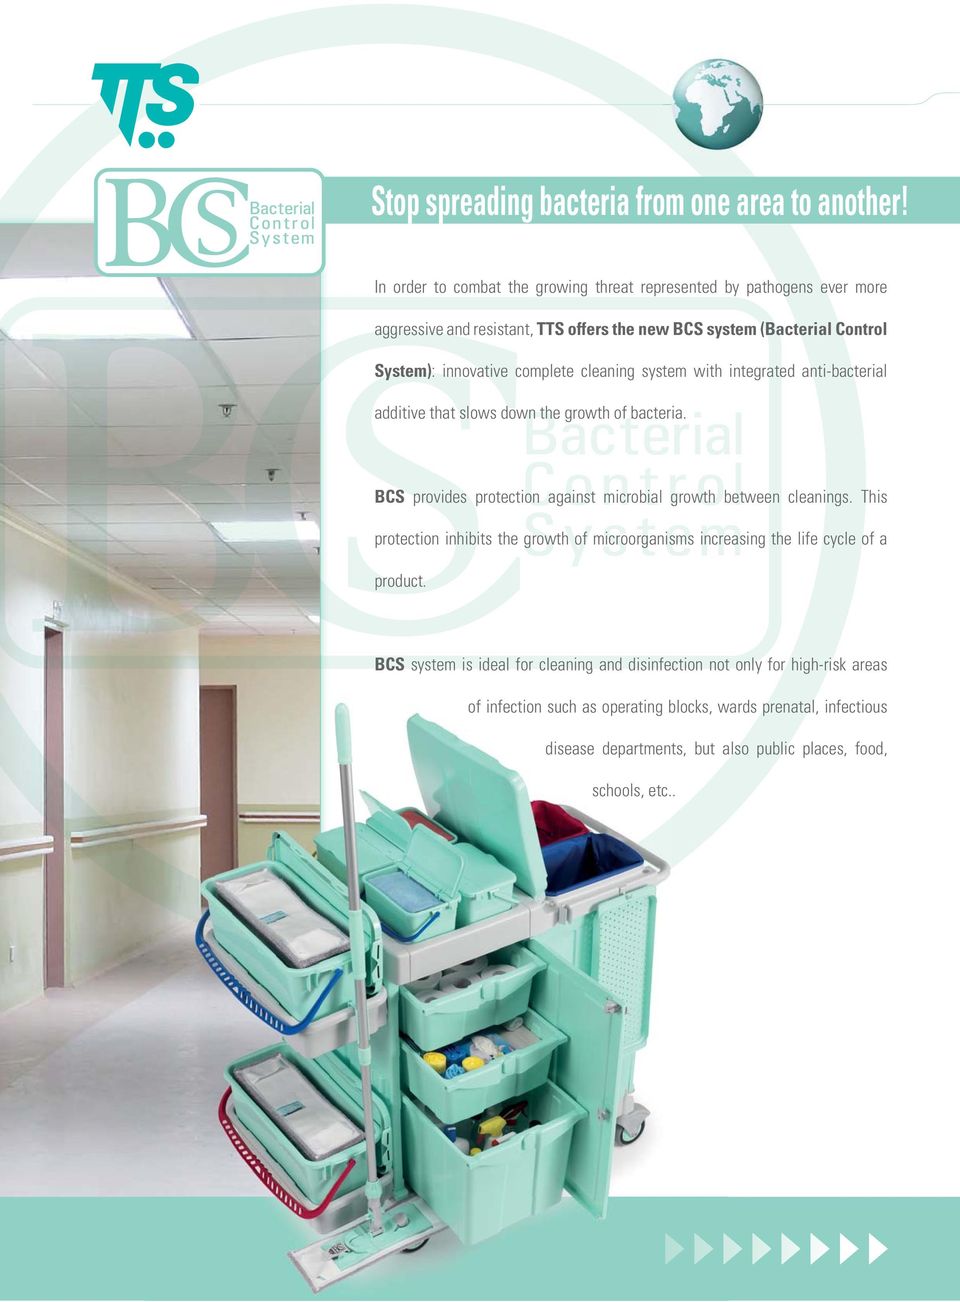 complete cleaning system with integrated anti-bacterial additive that slows down the growth of bacteria. BCS provides protection against microbial growth between cleanings.